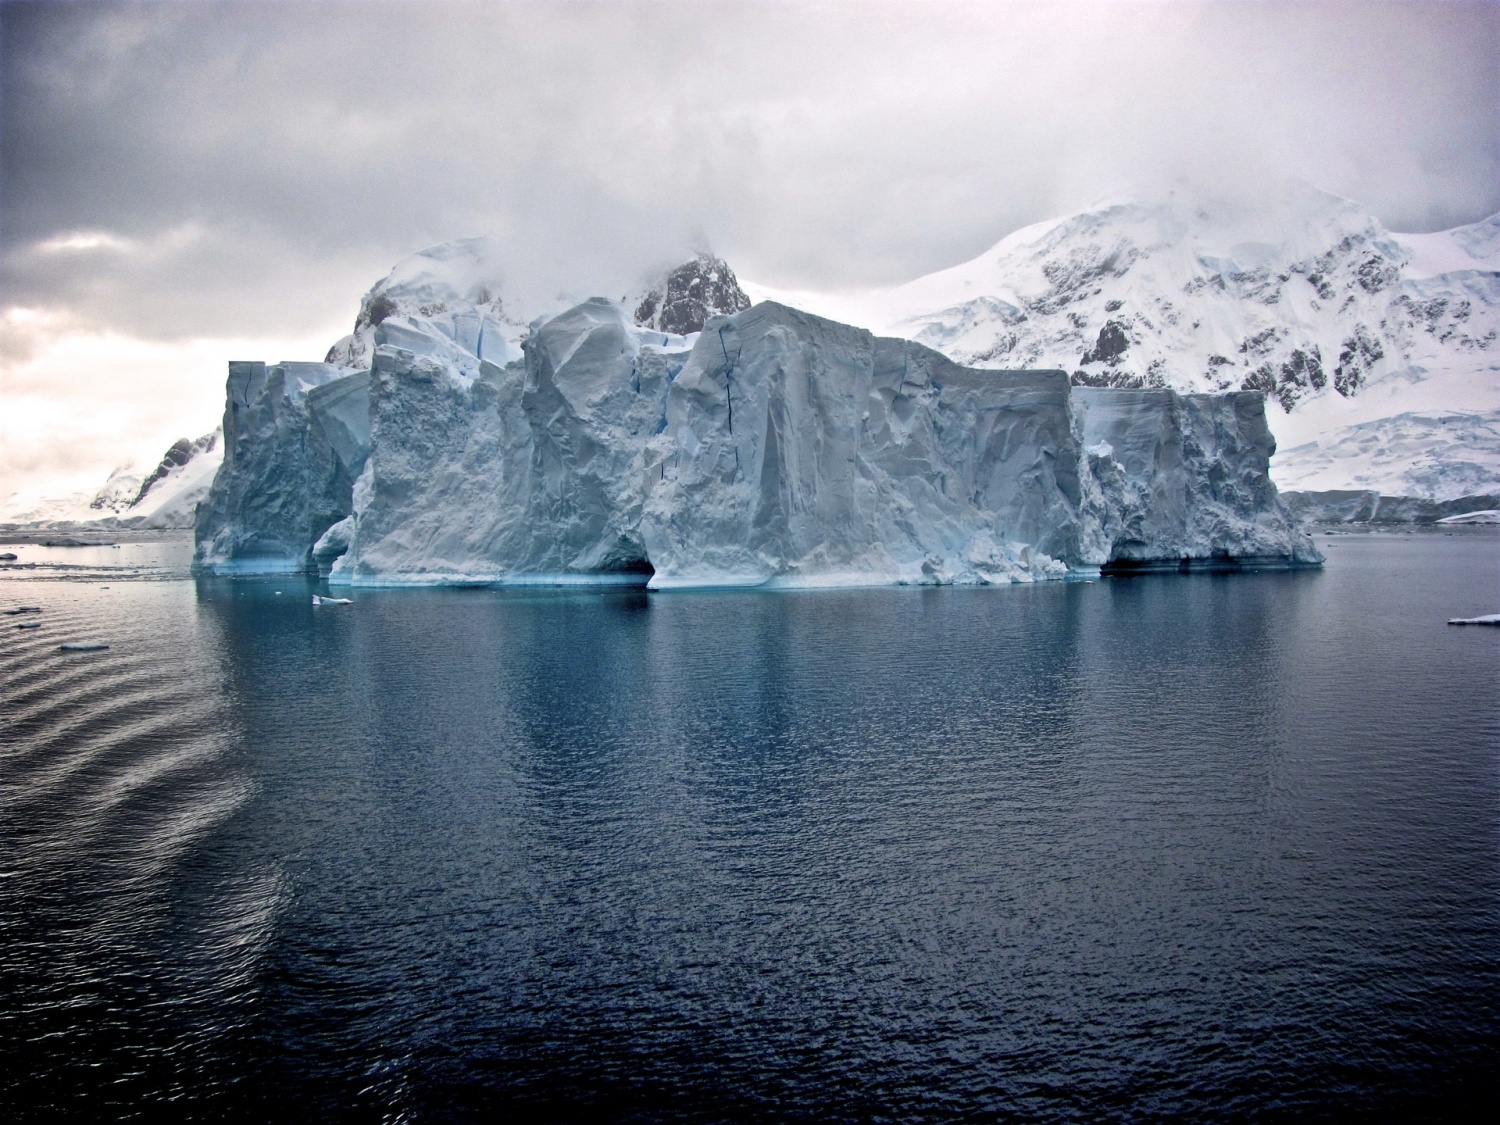 Despite Global Warming, Antarctica Ice Shelves Exhibit Growth for the Past 20 Years